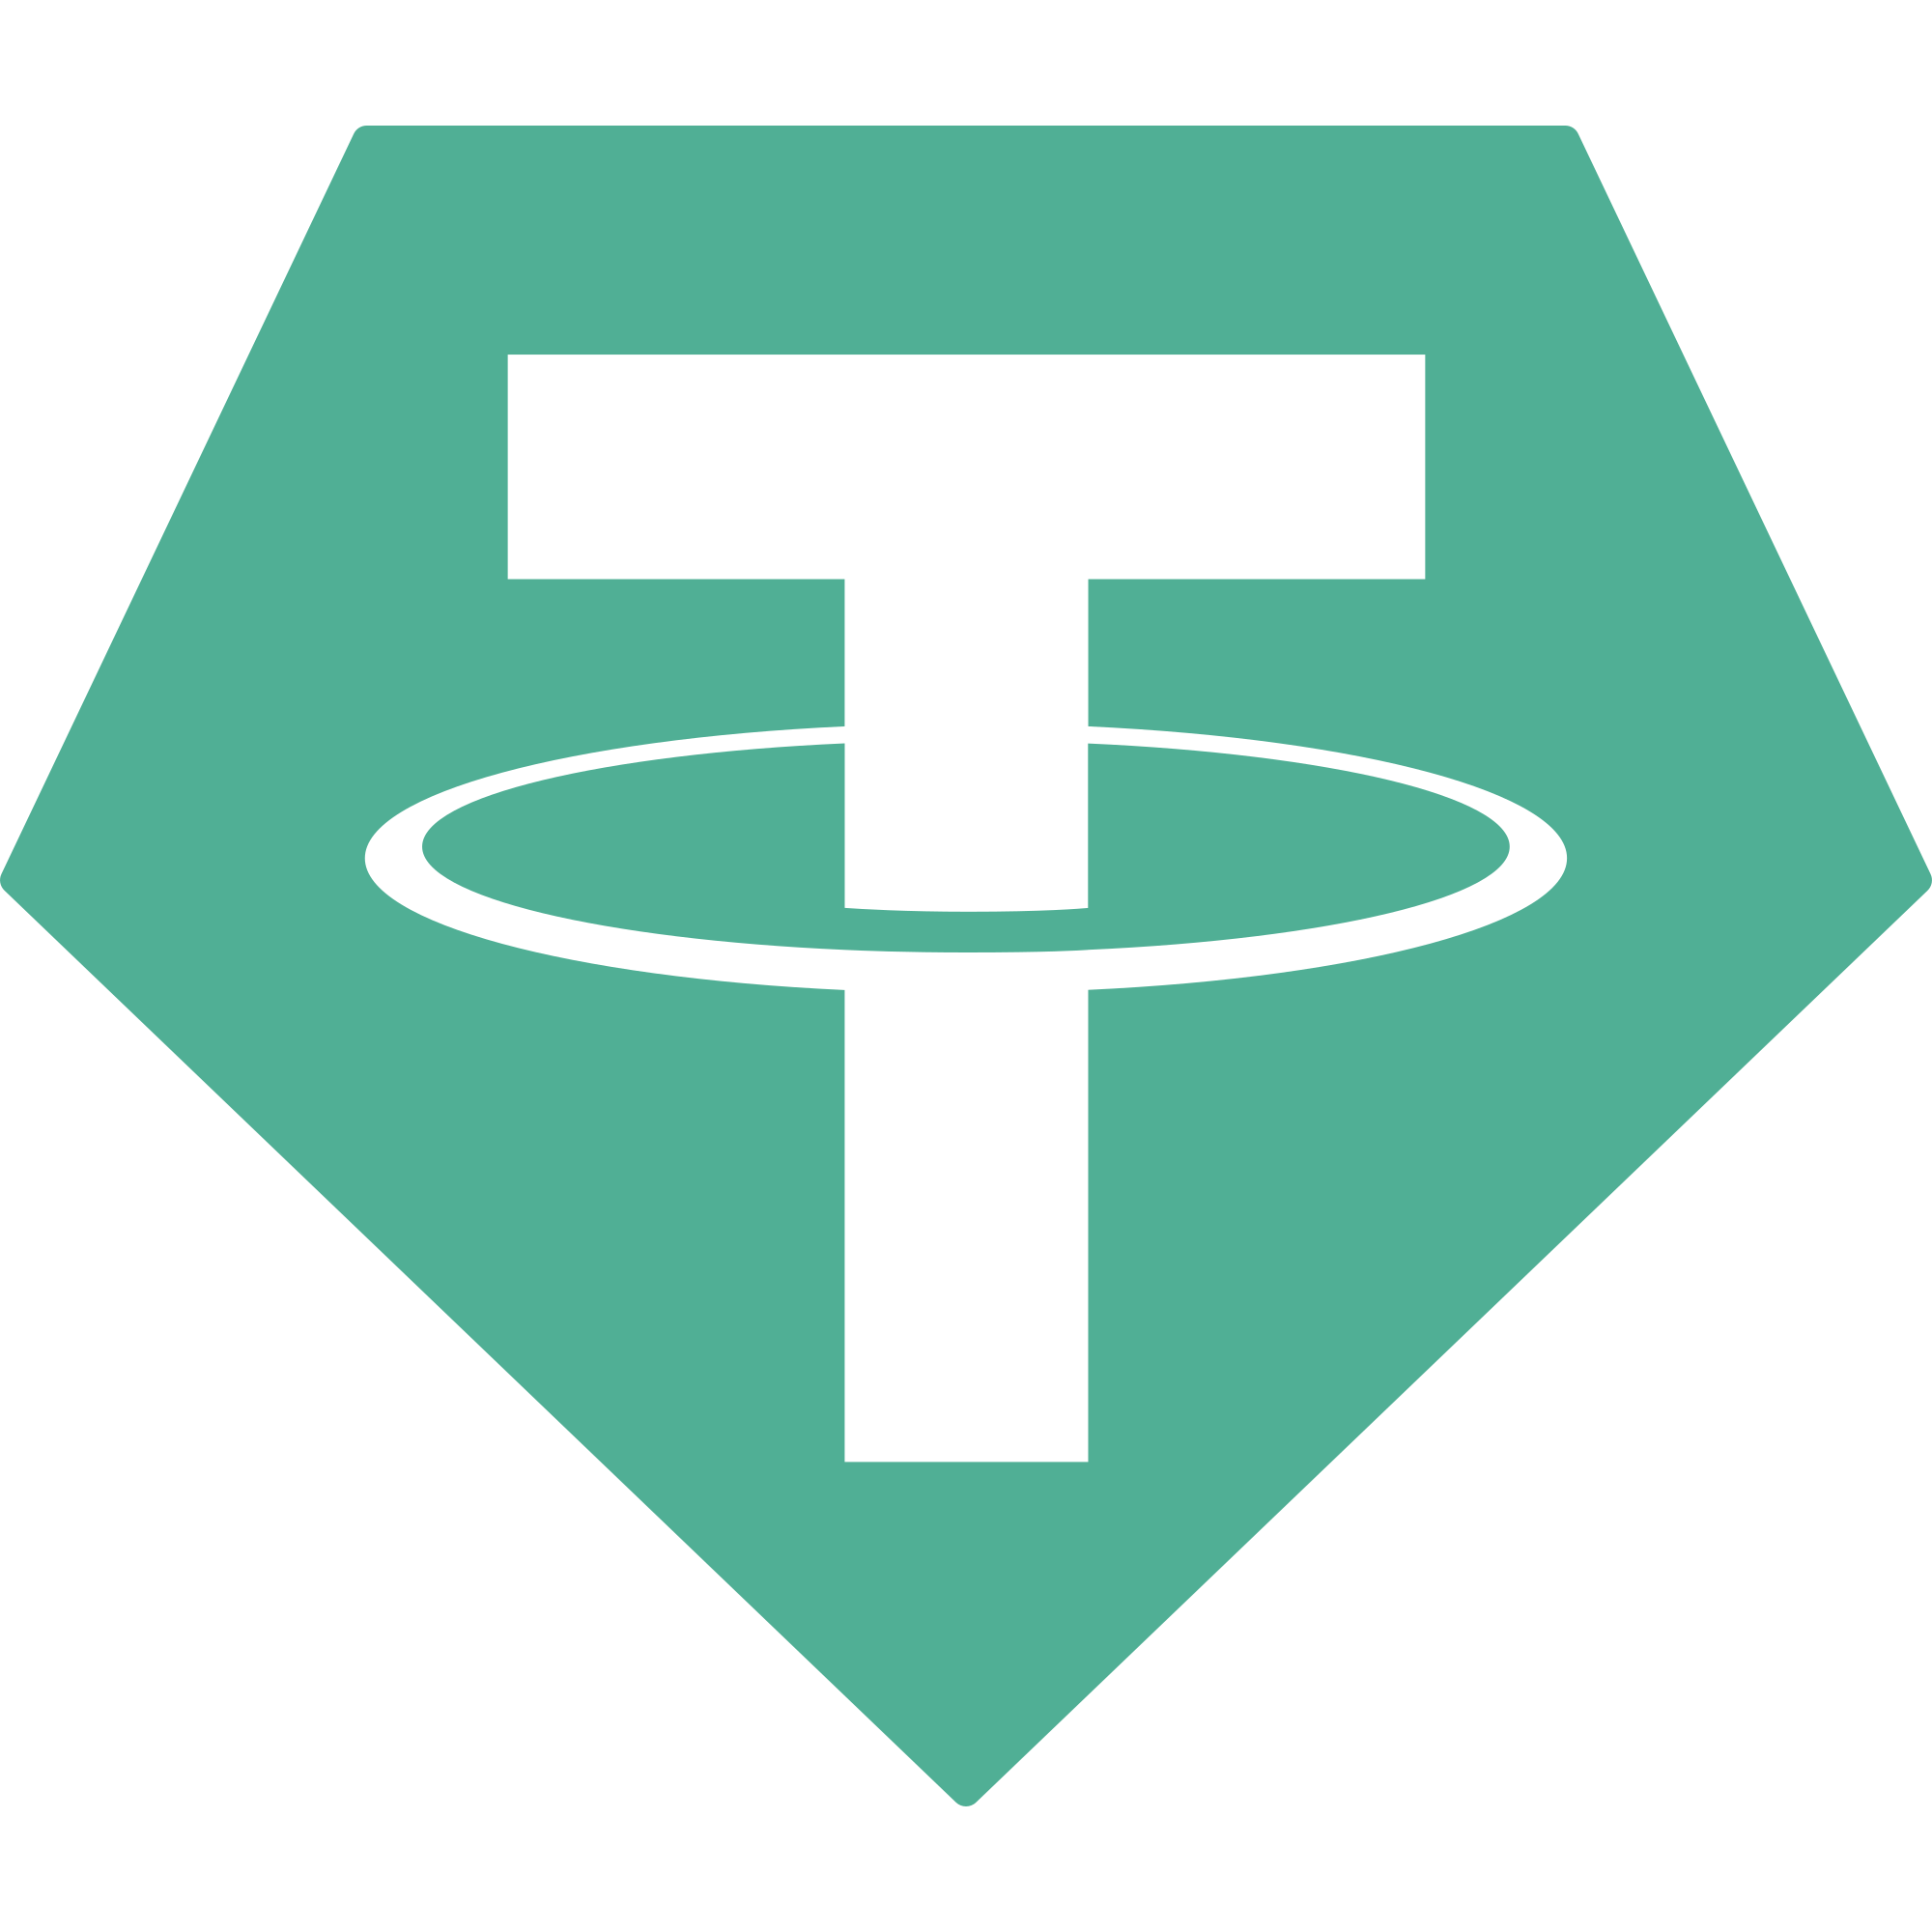 An image of the USDT Tether logo